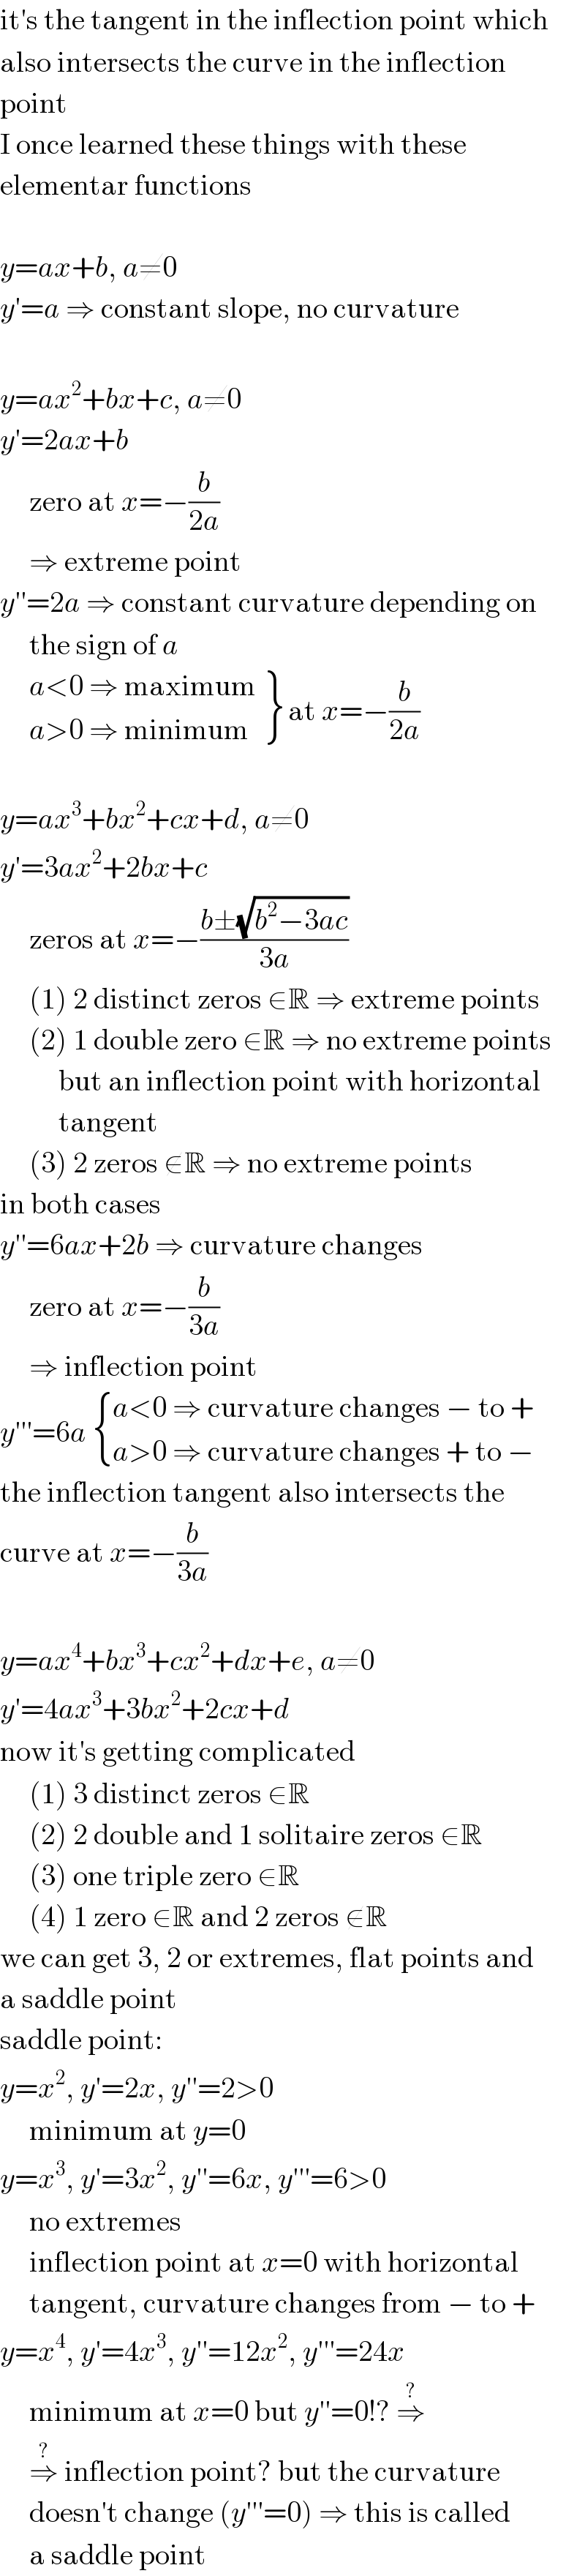 it′s the tangent in the inflection point which  also intersects the curve in the inflection  point  I once learned these things with these  elementar functions    y=ax+b, a≠0  y′=a ⇒ constant slope, no curvature    y=ax^2 +bx+c, a≠0  y′=2ax+b       zero at x=−(b/(2a))       ⇒ extreme point  y′′=2a ⇒ constant curvature depending on       the sign of a        {: ((a<0 ⇒ maximum)),((a>0 ⇒ minimum)) } at x=−(b/(2a))    y=ax^3 +bx^2 +cx+d, a≠0  y′=3ax^2 +2bx+c       zeros at x=−((b±(√(b^2 −3ac)))/(3a))       (1) 2 distinct zeros ∈R ⇒ extreme points       (2) 1 double zero ∈R ⇒ no extreme points            but an inflection point with horizontal            tangent       (3) 2 zeros ∉R ⇒ no extreme points  in both cases  y′′=6ax+2b ⇒ curvature changes       zero at x=−(b/(3a))       ⇒ inflection point  y′′′=6a  { ((a<0 ⇒ curvature changes − to +)),((a>0 ⇒ curvature changes + to −)) :}  the inflection tangent also intersects the  curve at x=−(b/(3a))    y=ax^4 +bx^3 +cx^2 +dx+e, a≠0  y′=4ax^3 +3bx^2 +2cx+d  now it′s getting complicated       (1) 3 distinct zeros ∈R       (2) 2 double and 1 solitaire zeros ∈R       (3) one triple zero ∈R       (4) 1 zero ∈R and 2 zeros ∉R  we can get 3, 2 or extremes, flat points and  a saddle point  saddle point:  y=x^2 , y′=2x, y′′=2>0       minimum at y=0  y=x^3 , y′=3x^2 , y′′=6x, y′′′=6>0       no extremes       inflection point at x=0 with horizontal       tangent, curvature changes from − to +  y=x^4 , y′=4x^3 , y′′=12x^2 , y′′′=24x       minimum at x=0 but y′′=0!? ⇒^?        ⇒^?  inflection point? but the curvature       doesn′t change (y′′′=0) ⇒ this is called       a saddle point  